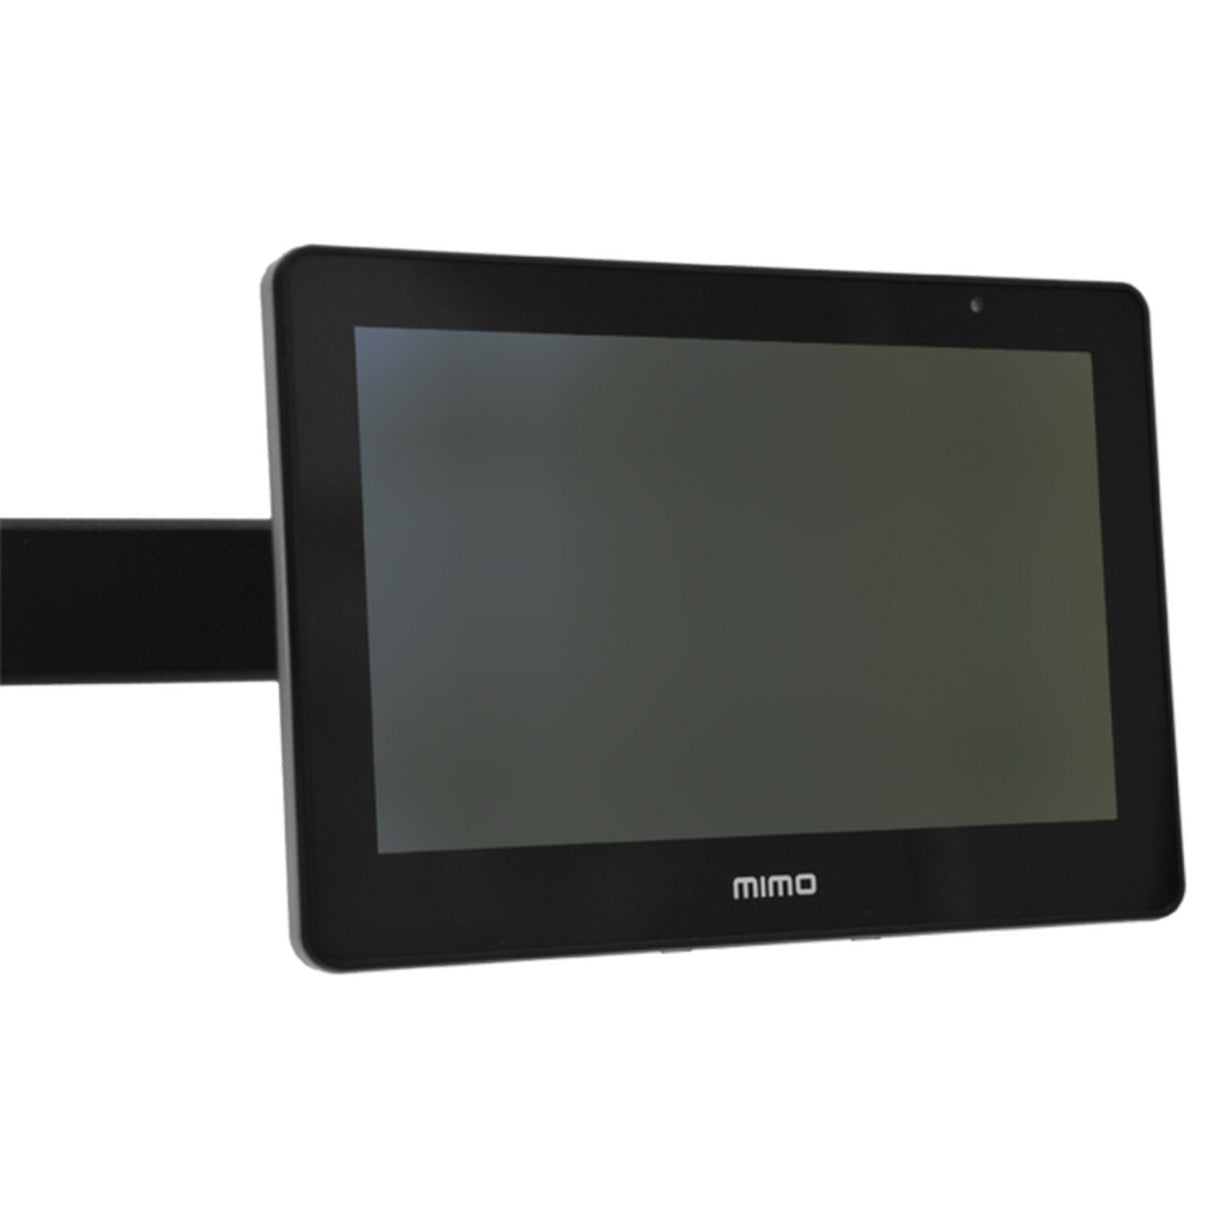 Mimo UM-760CF 7 Inch Capacitive Touch Display, USB with 75mm Vesa Pattern